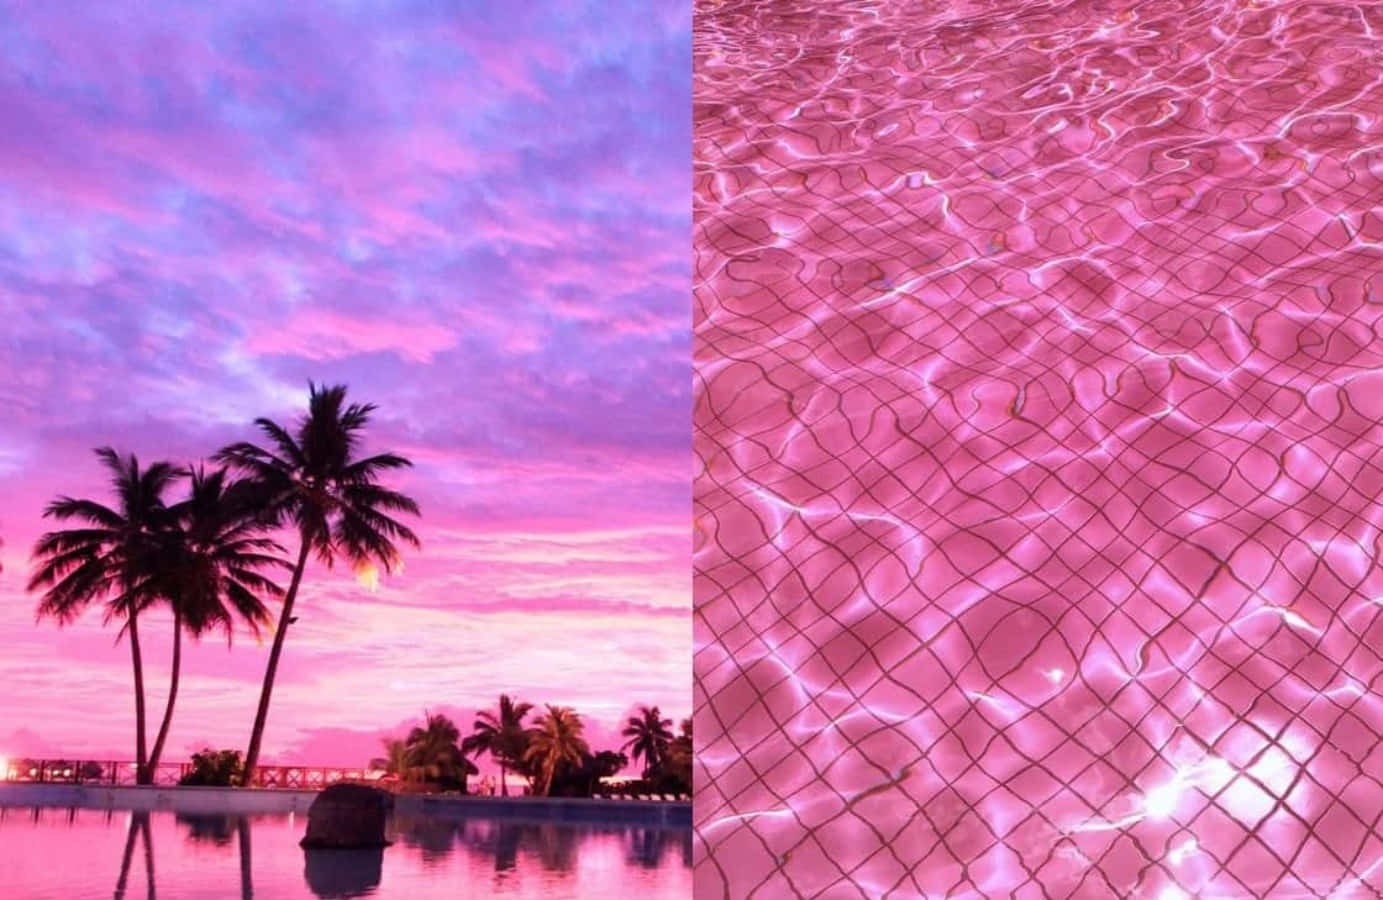 Aesthetic Pink Collage Sunset Sky And Pool Water